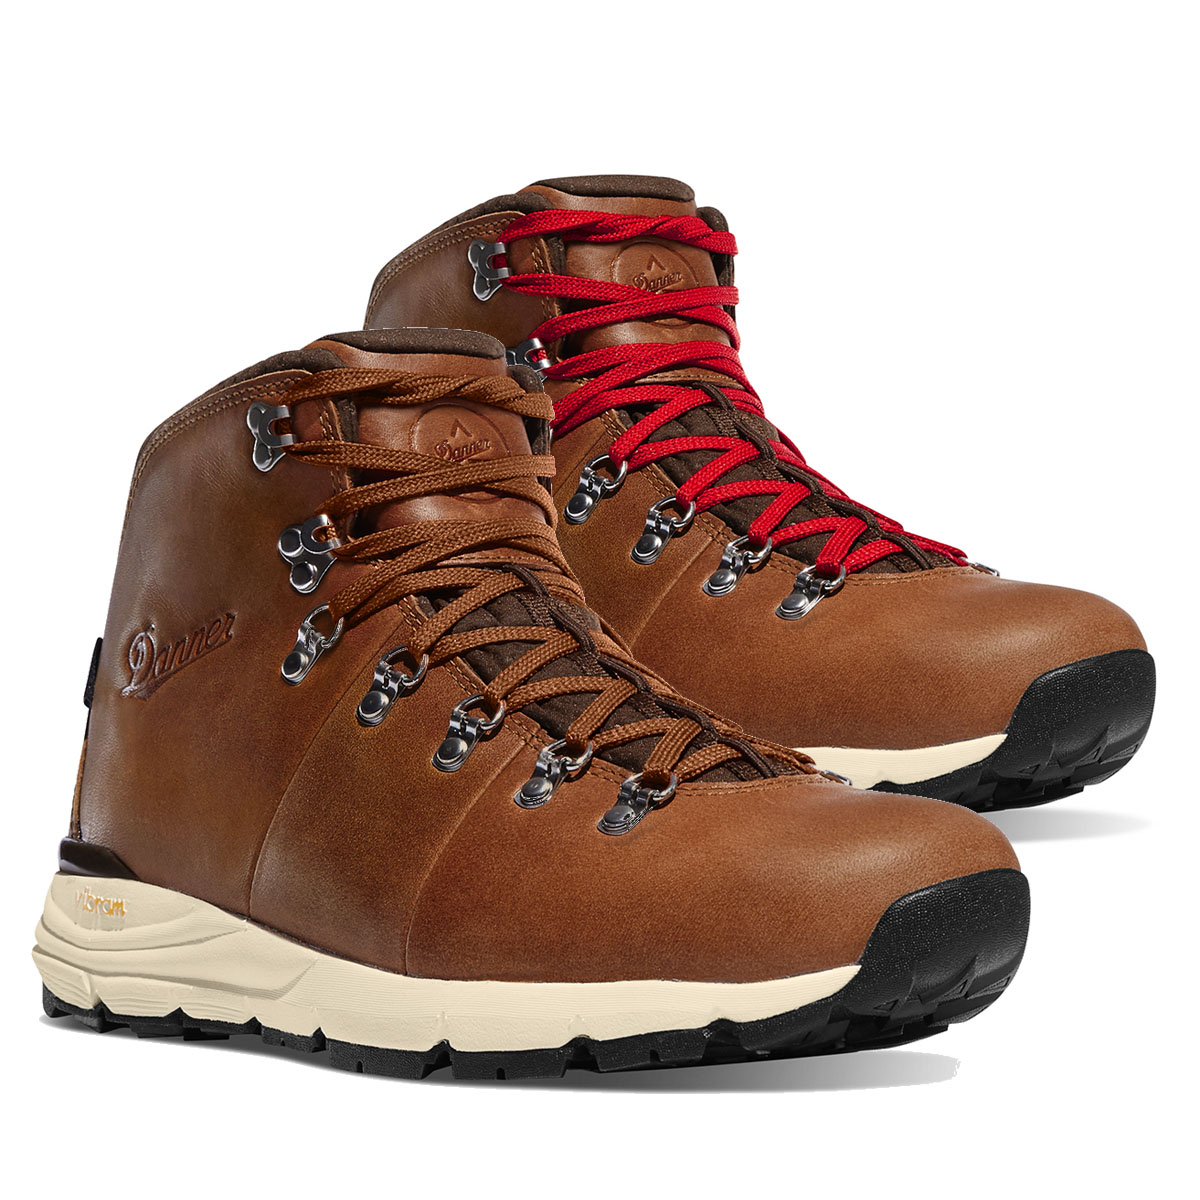 Danner Mountain 600 Boot Saddle Tan, waterproof and timeless shoe with a Vibram outsole for hiking in the woods and easy mountain trails